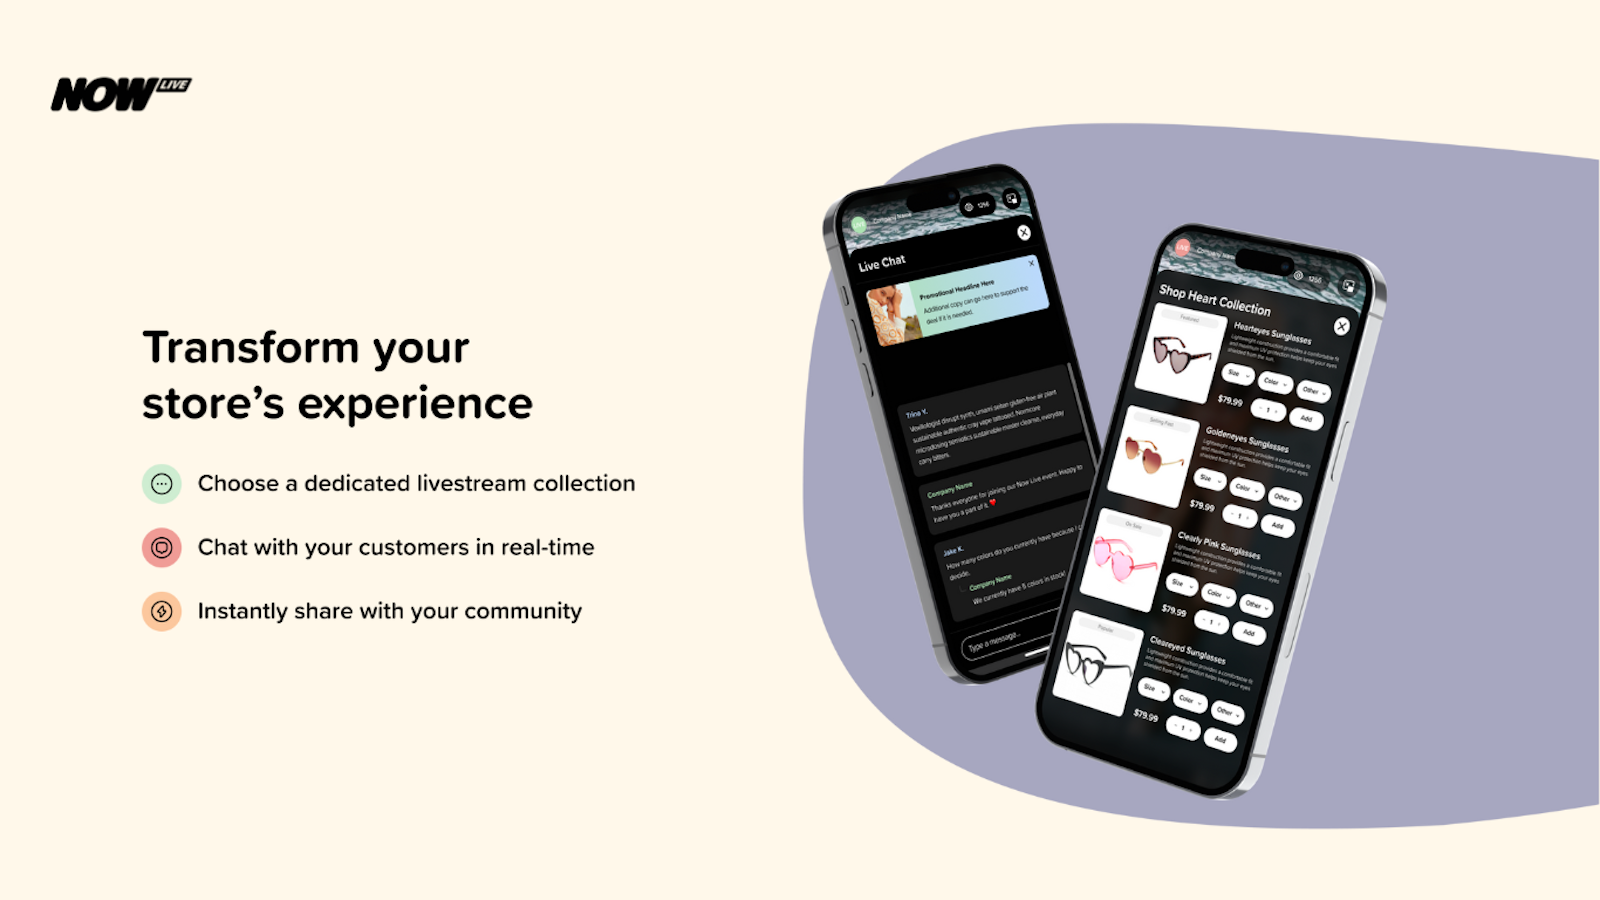 Mobile first and browser optimized for a seamless experience